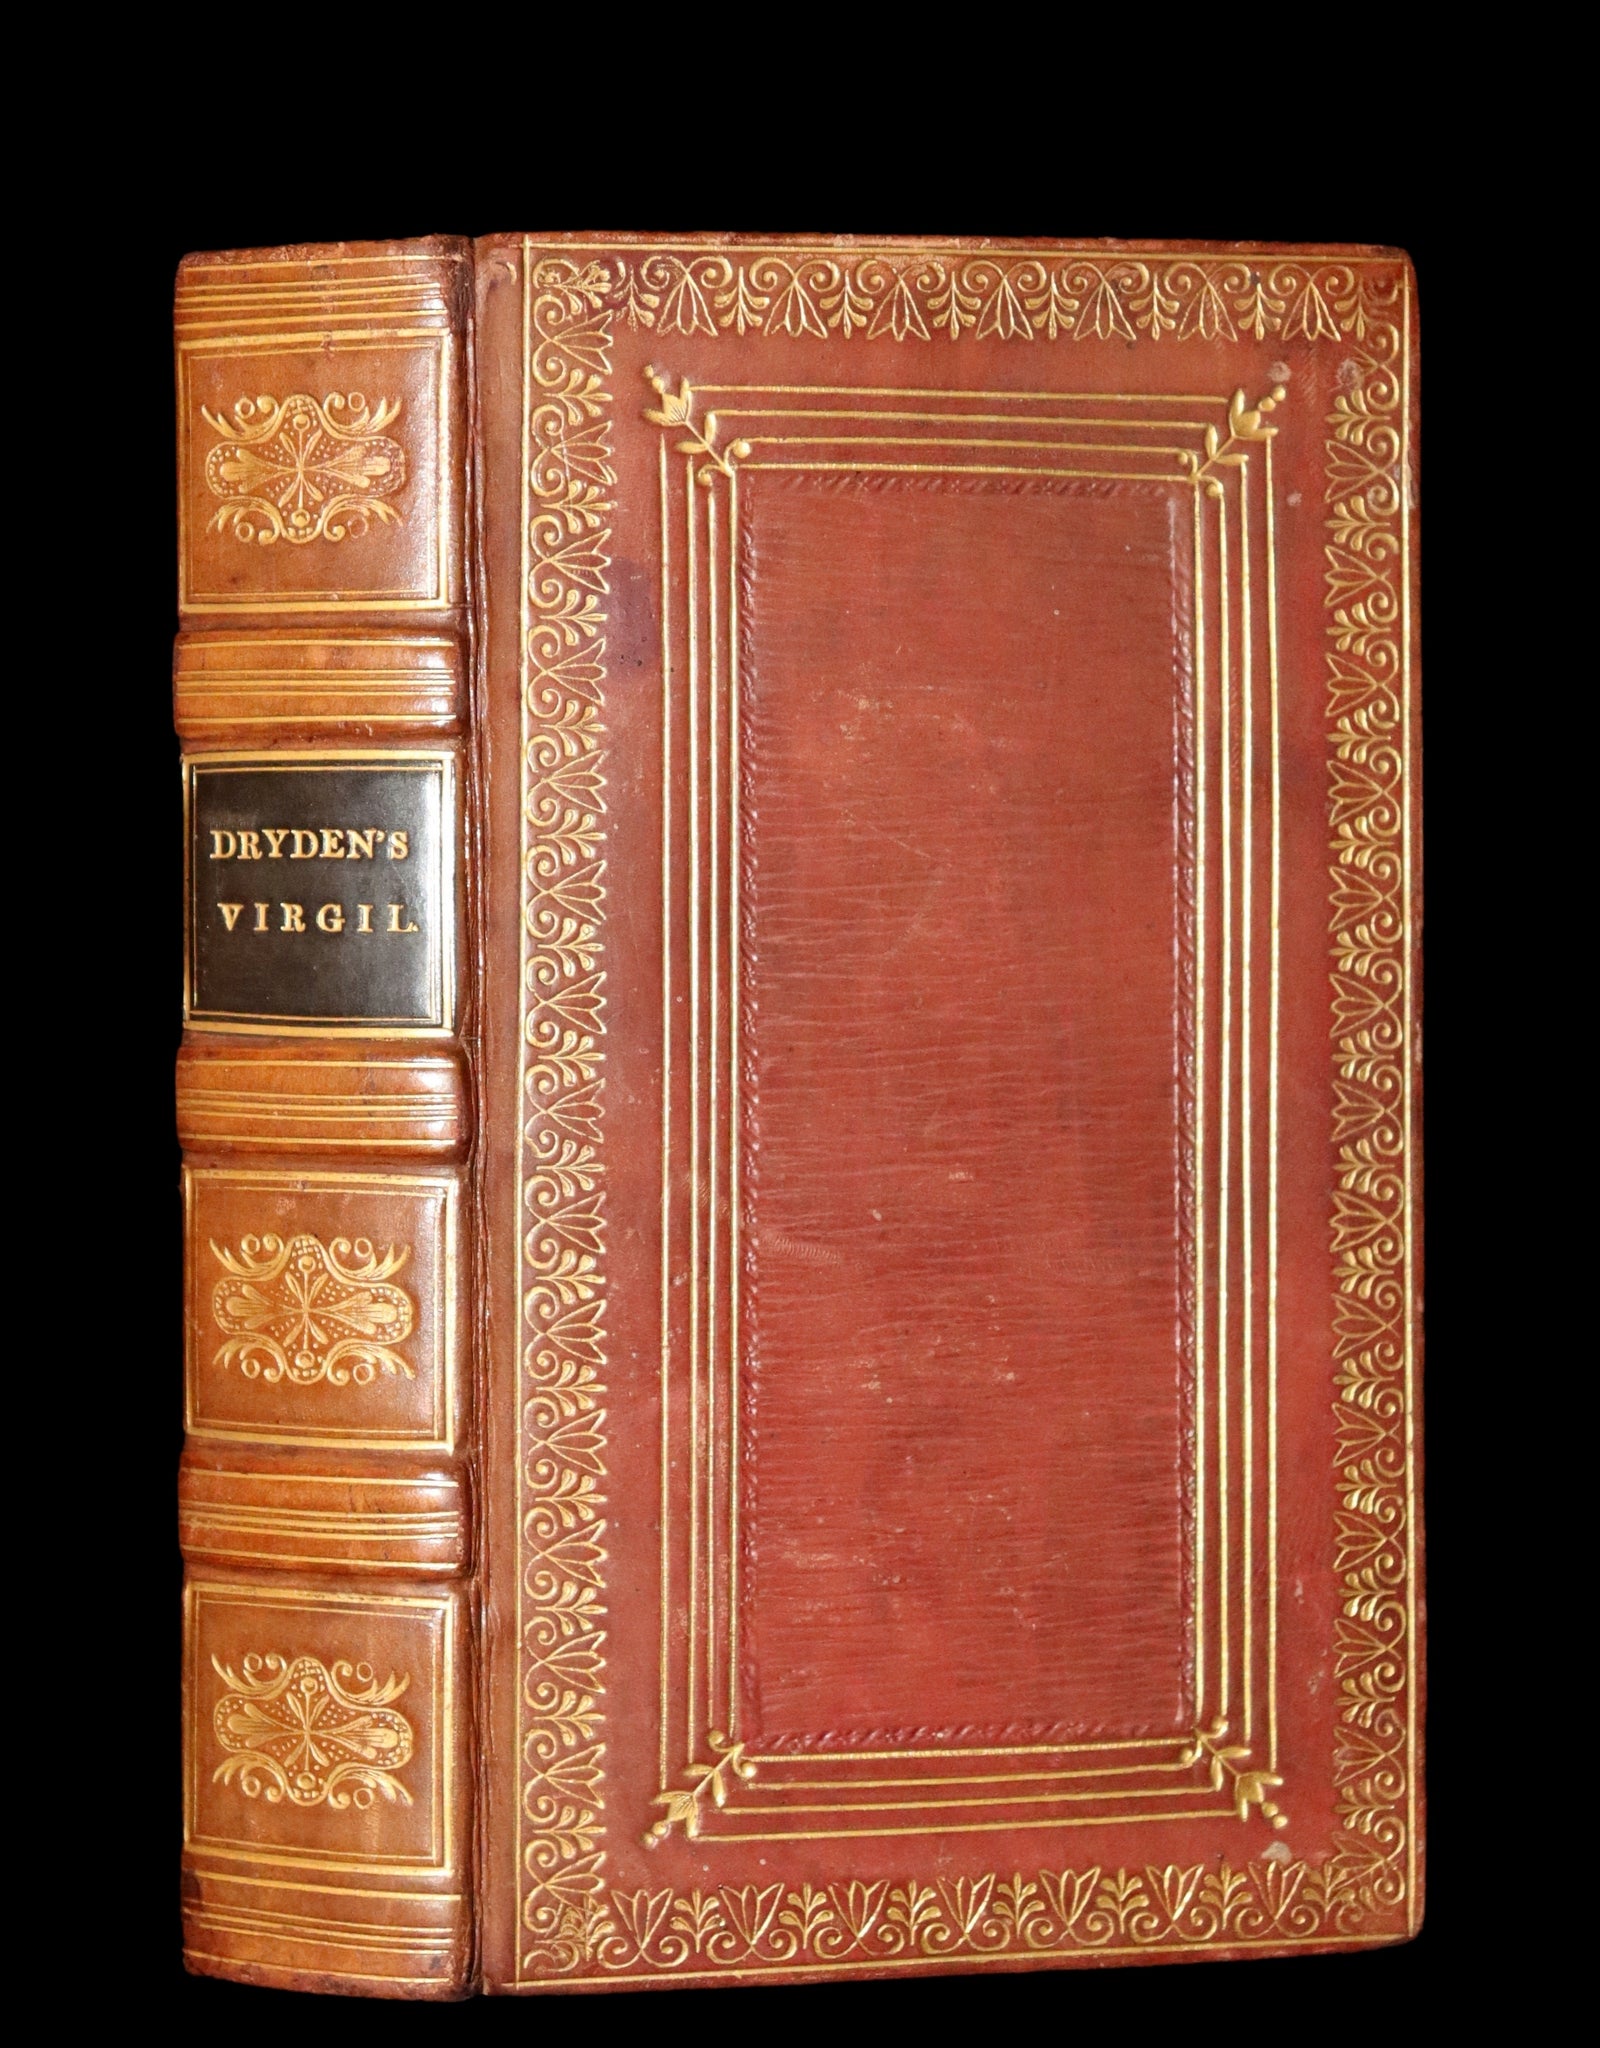 1825 Rare Book - The Works of Virgil Translated by Dryden with Walsh's Life of the Author. Georgics, Aeneis, etc.